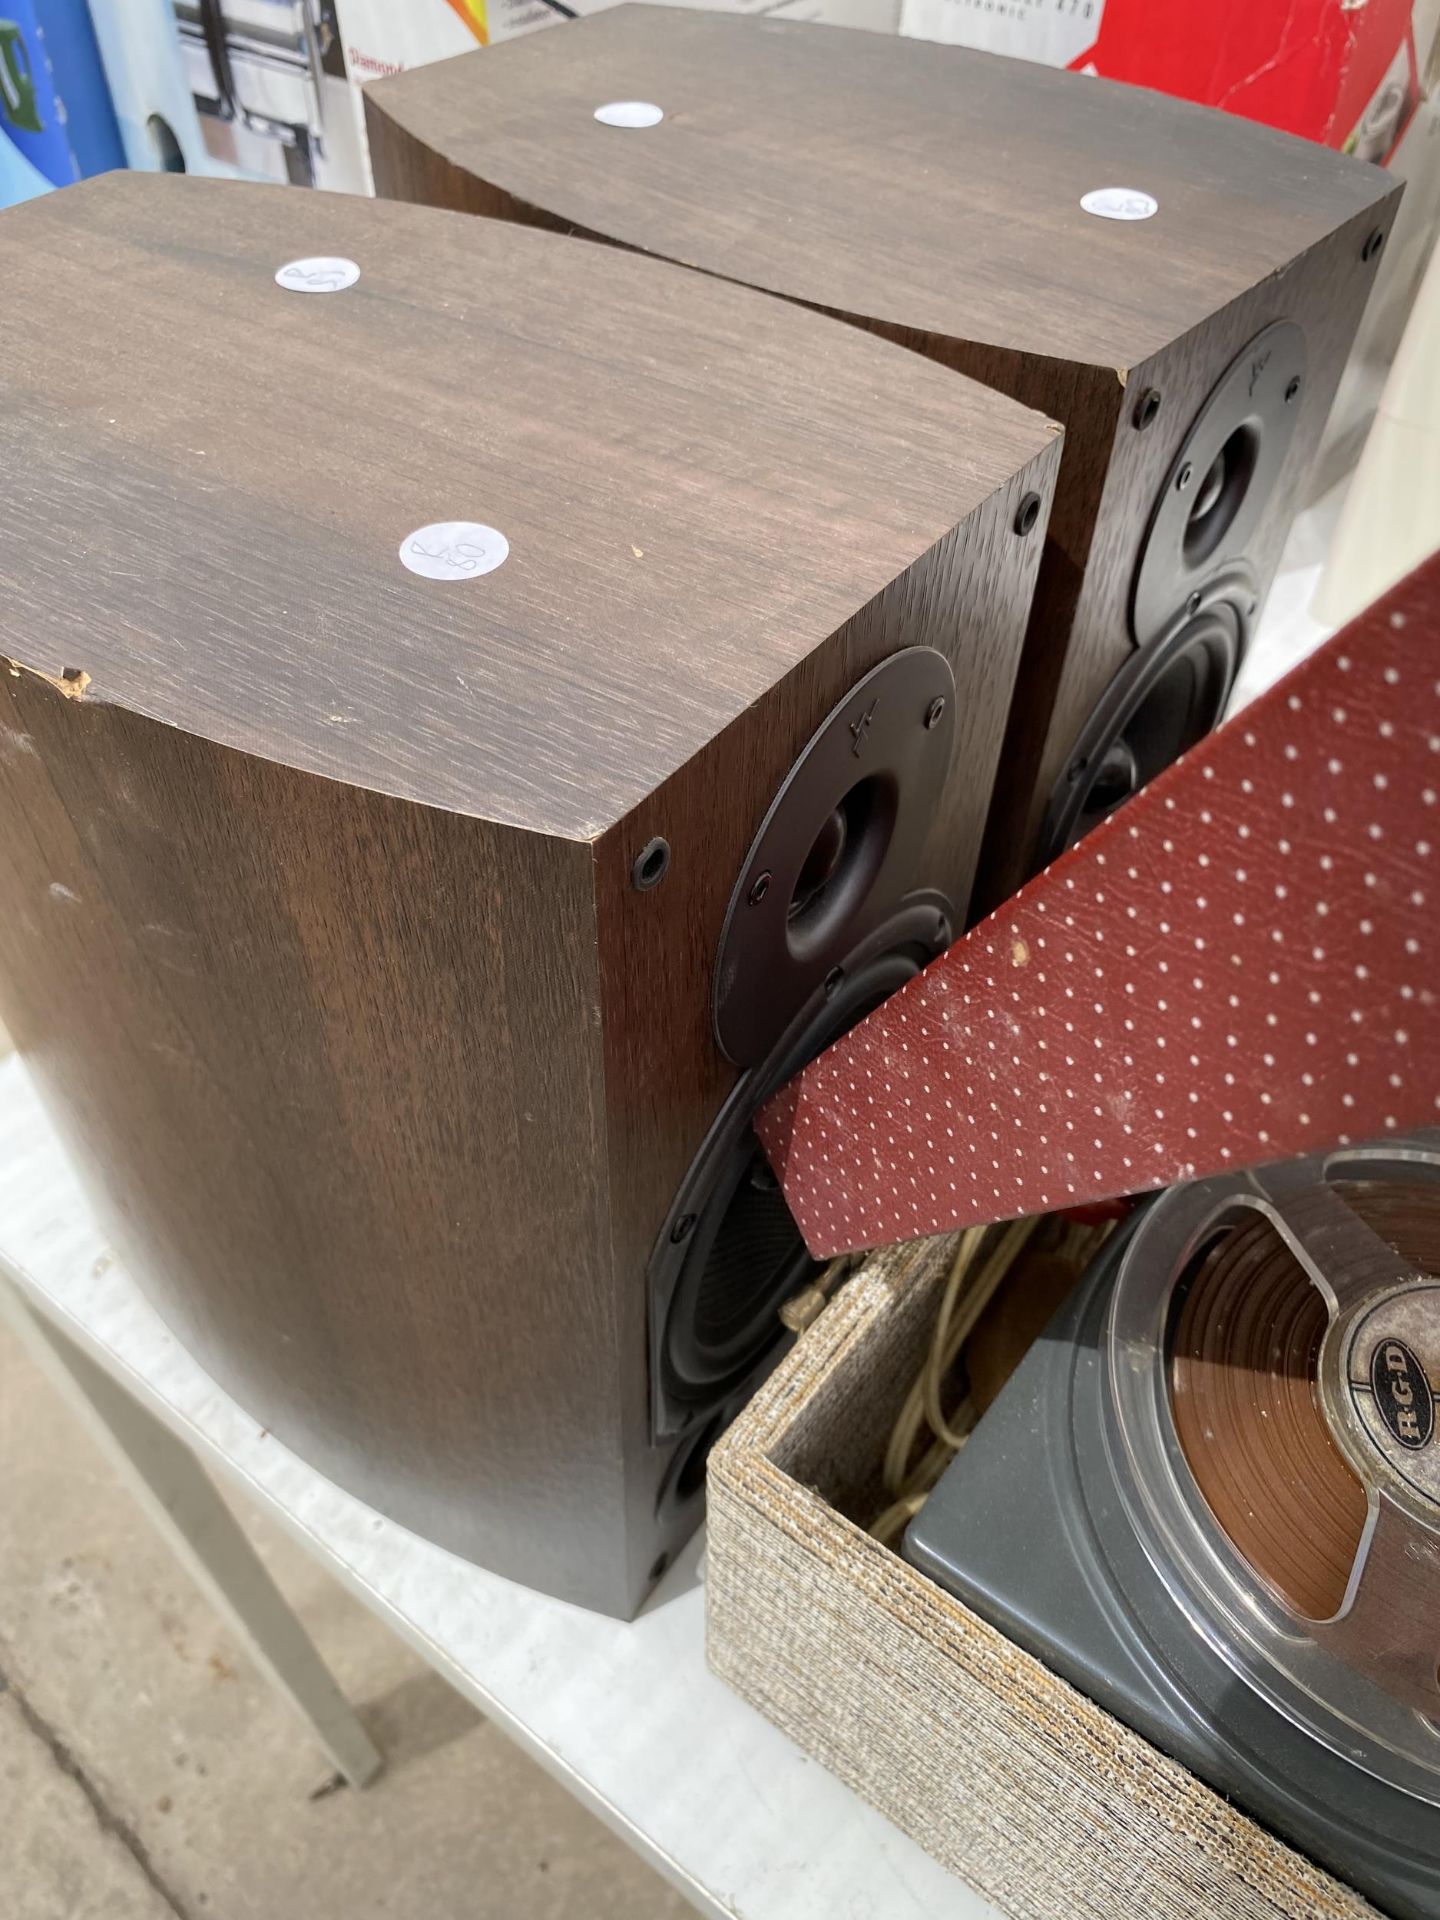 AN RGD TAPE TO TAPE PLAYER AND A PAIR OF WOODEN CASED SPEAKERS - Image 2 of 2